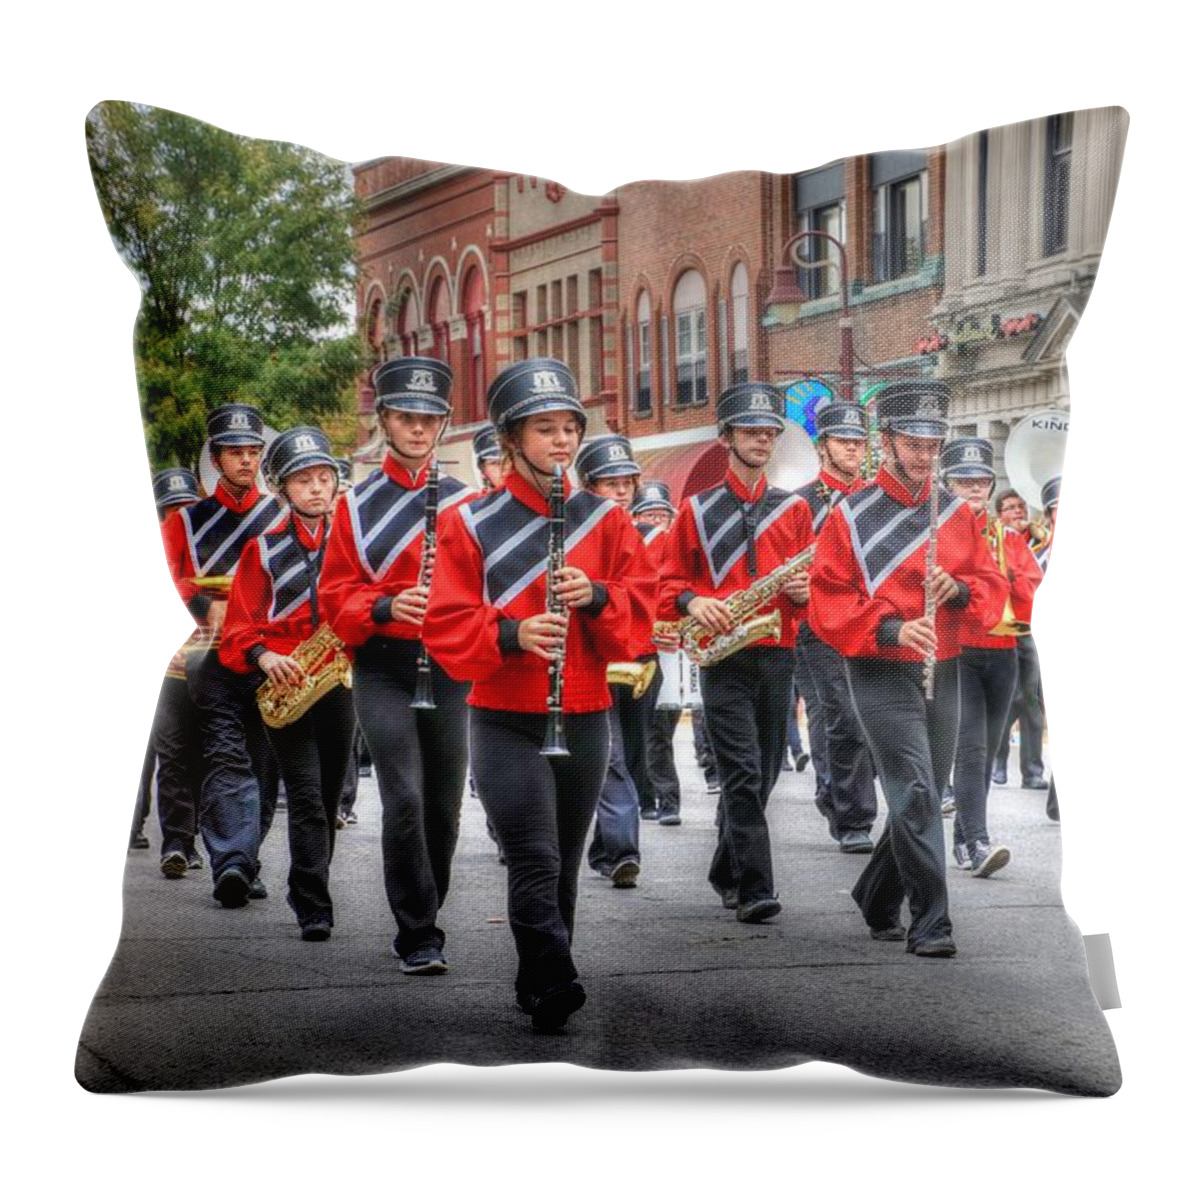 Clarinda Throw Pillow featuring the photograph Clarinda Iowa Marching Band by J Laughlin